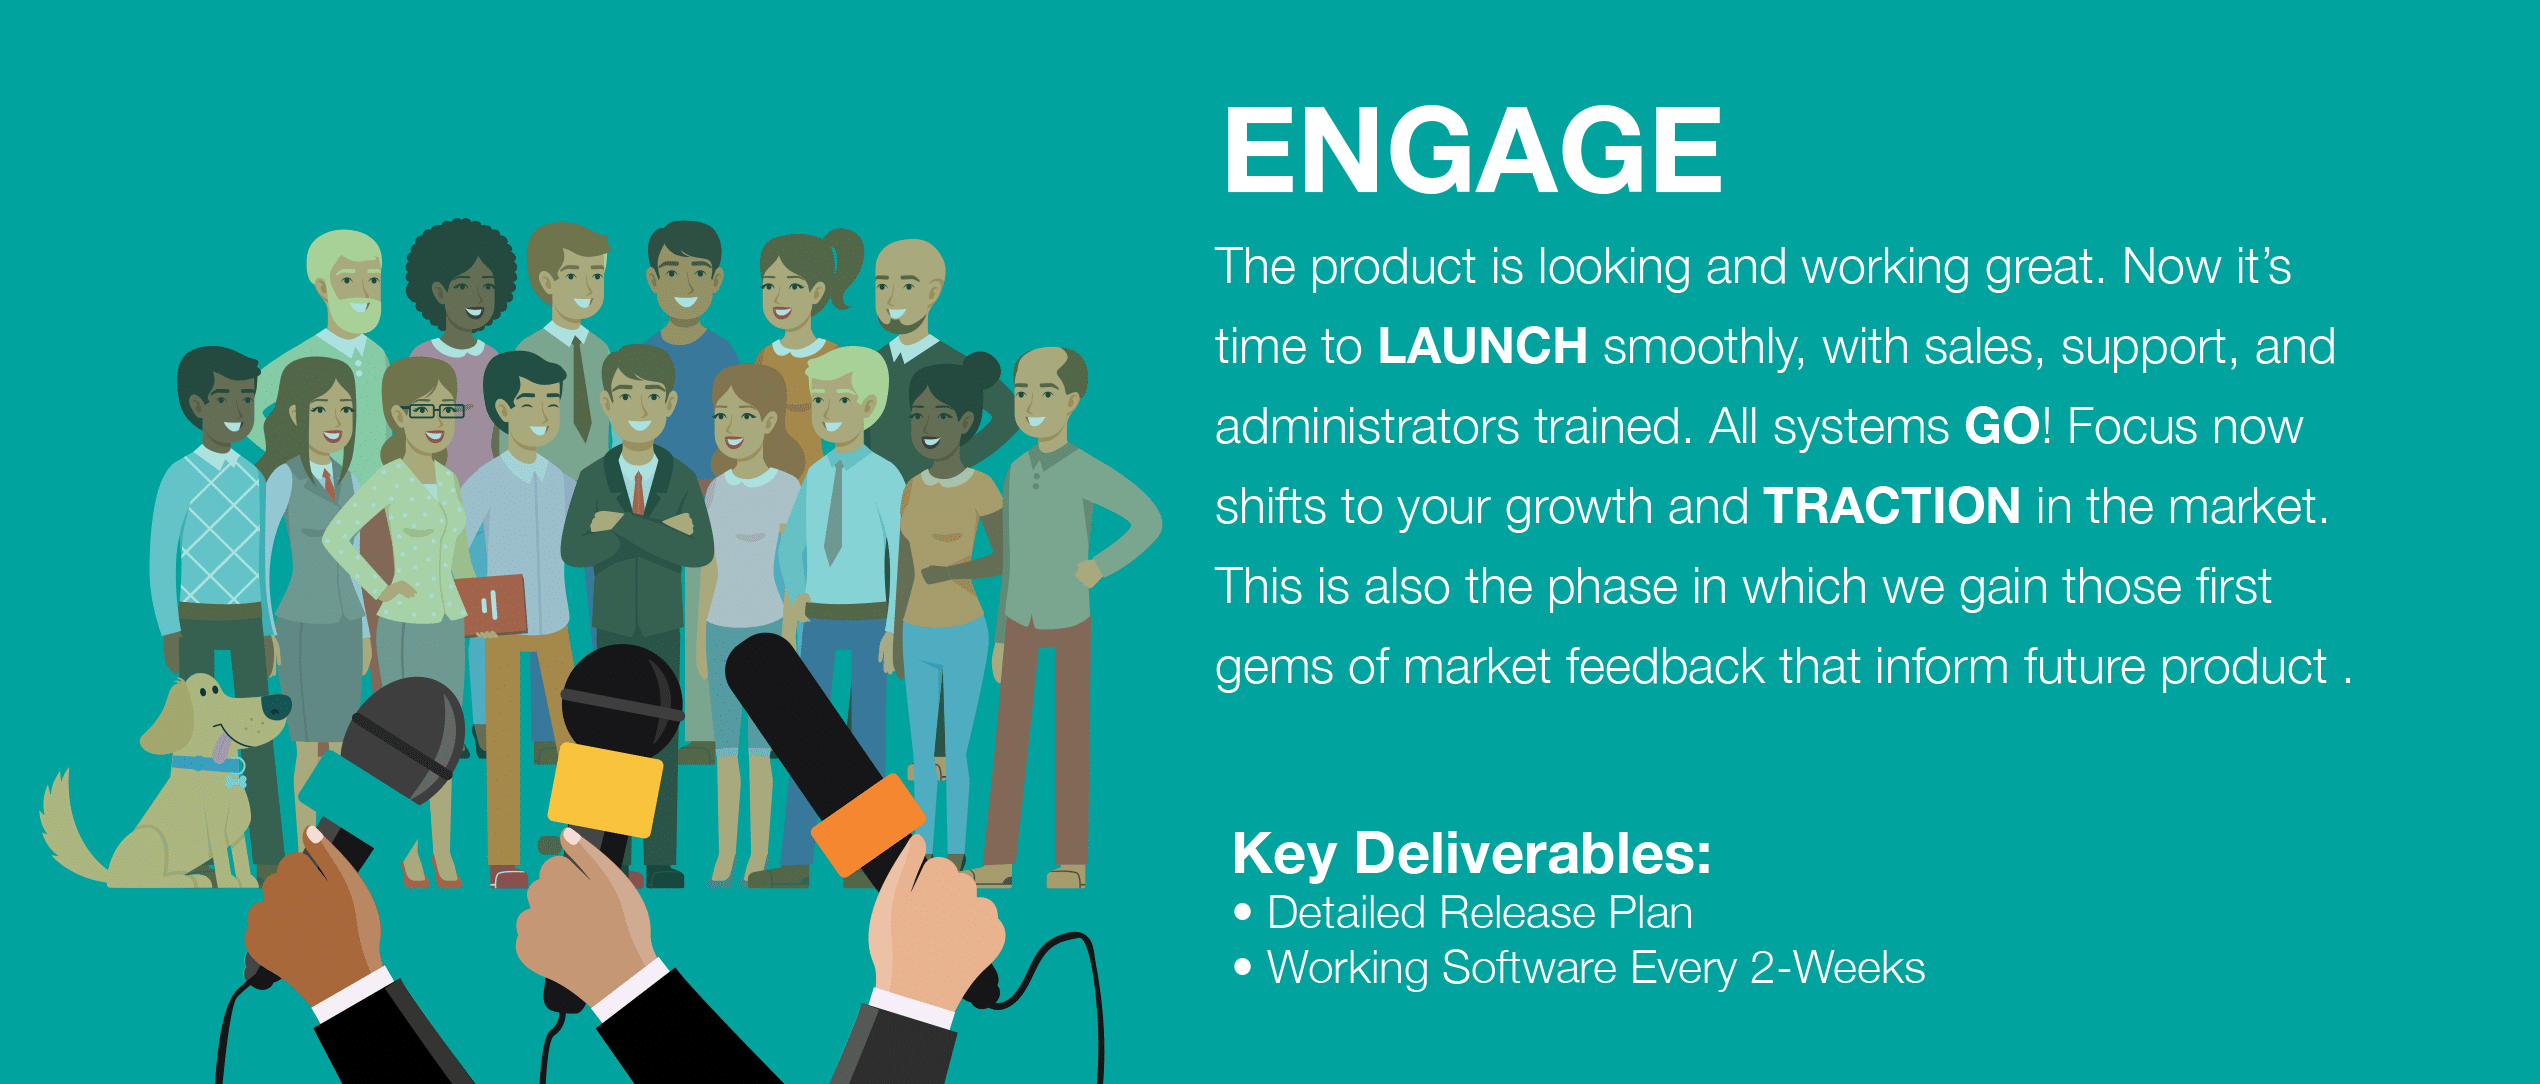 E(Engage) from IDEATE